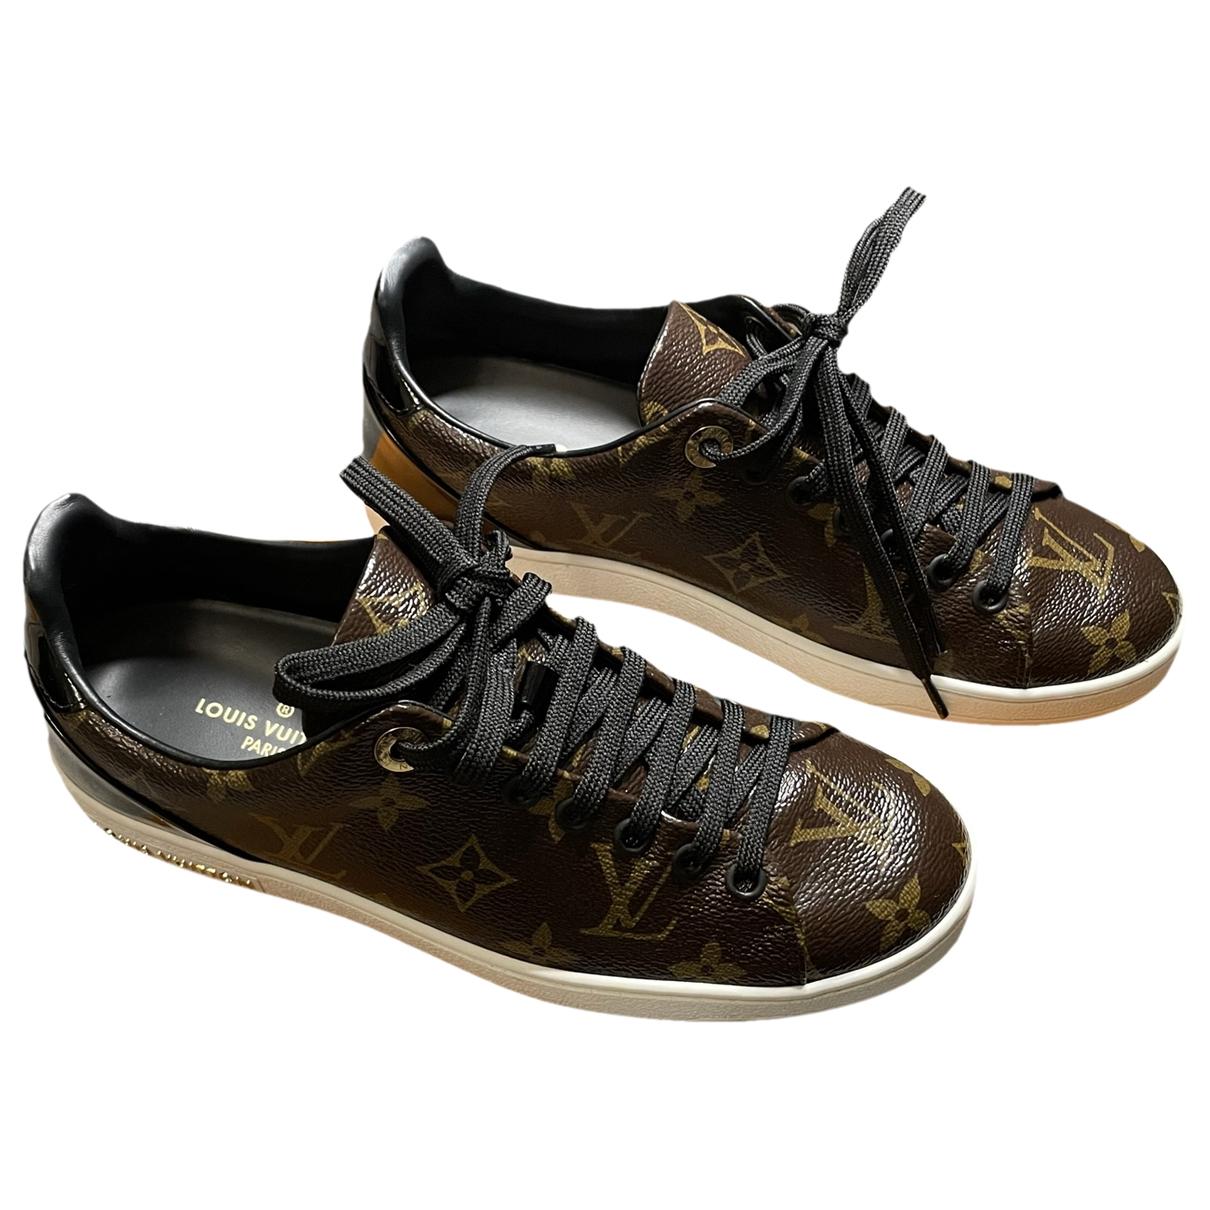 Frontrow leather trainers Louis Vuitton Brown size 37.5 EU in Leather -  25362400